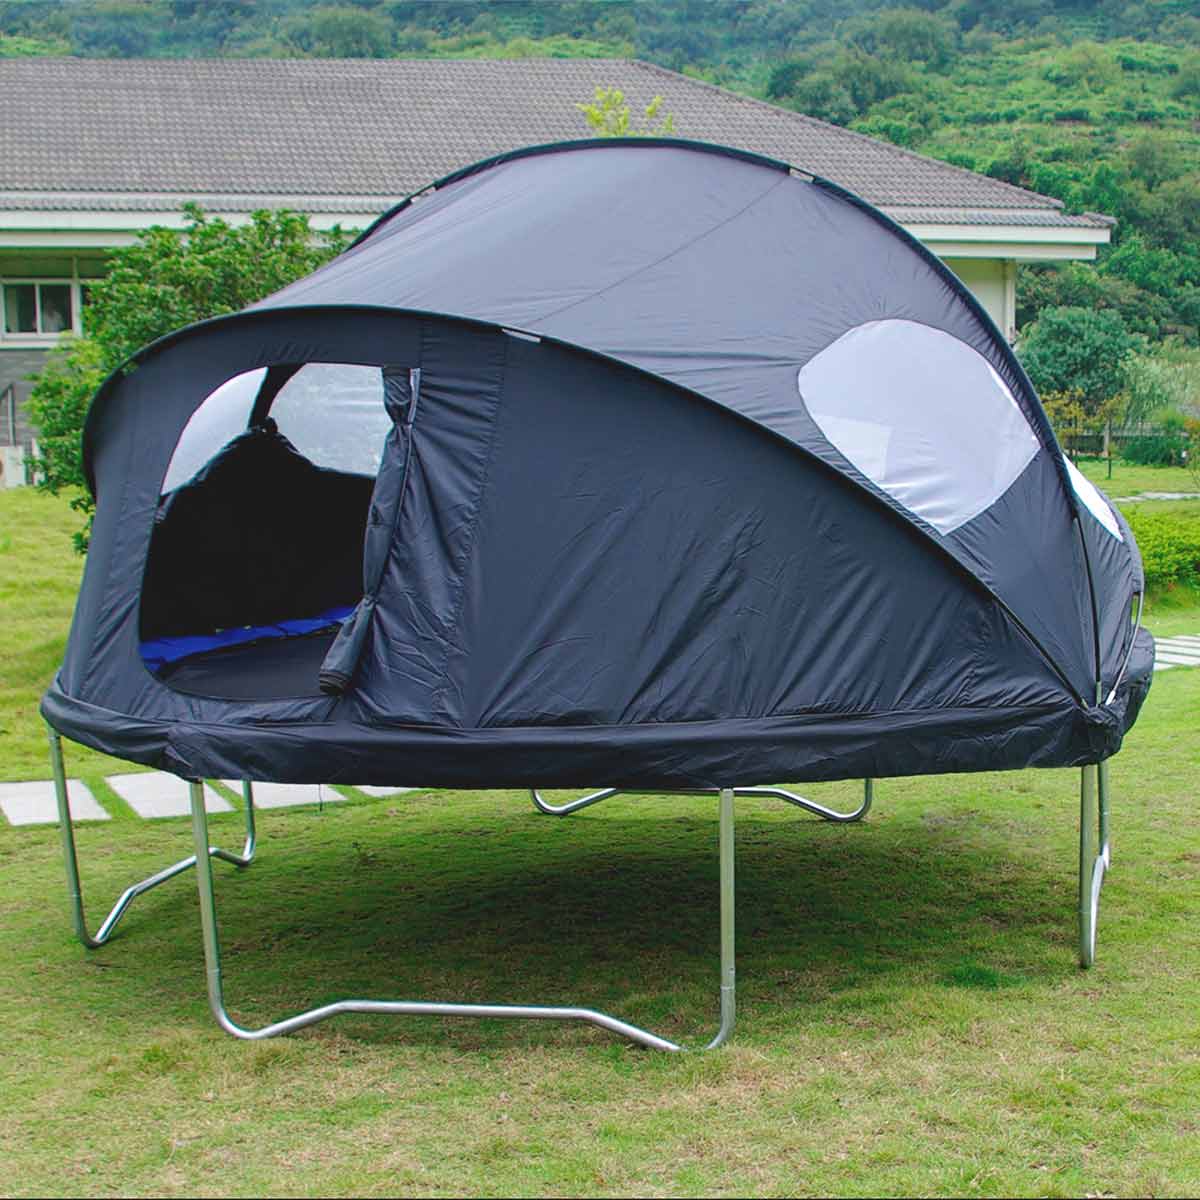 A trampoline on yard with a trampoline tent installed